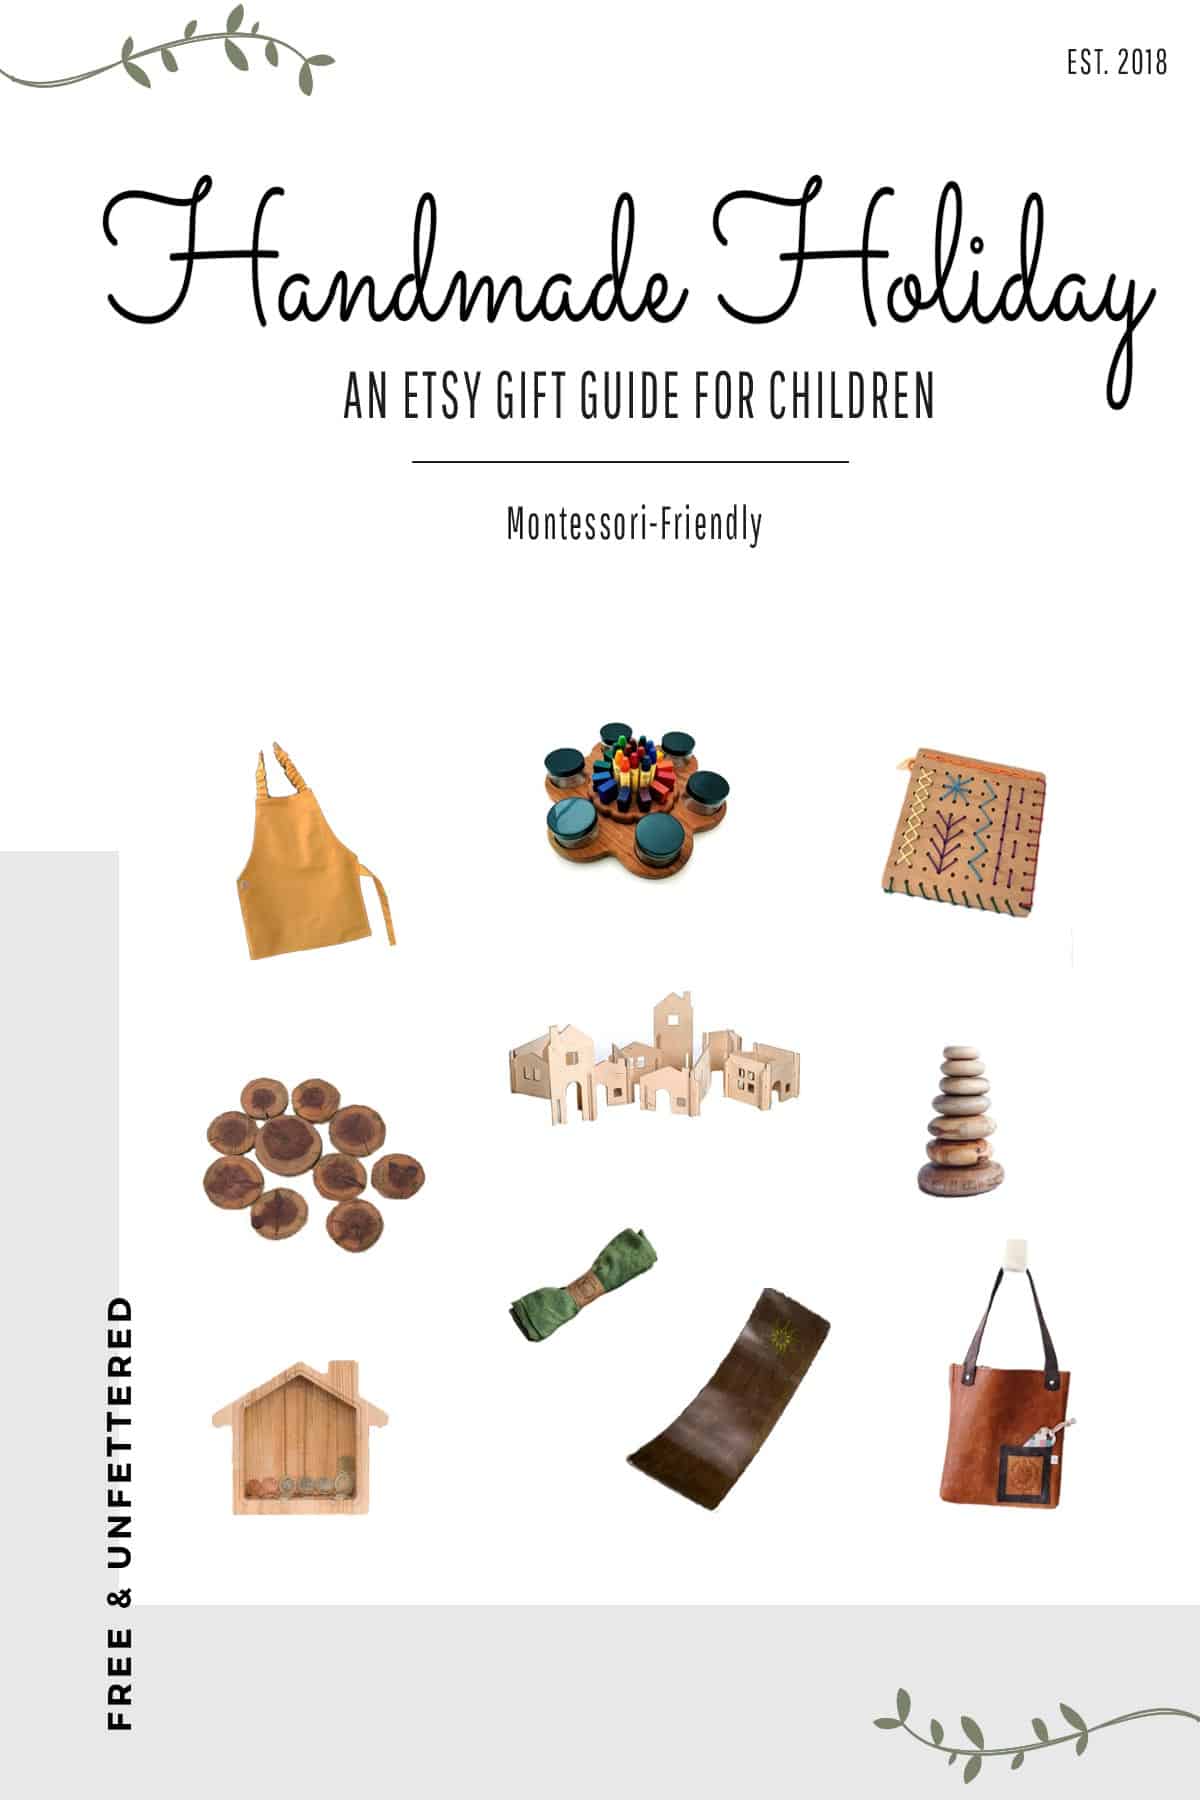 montessori-friendly gift guide to toys for children this holiday season, available on etsy